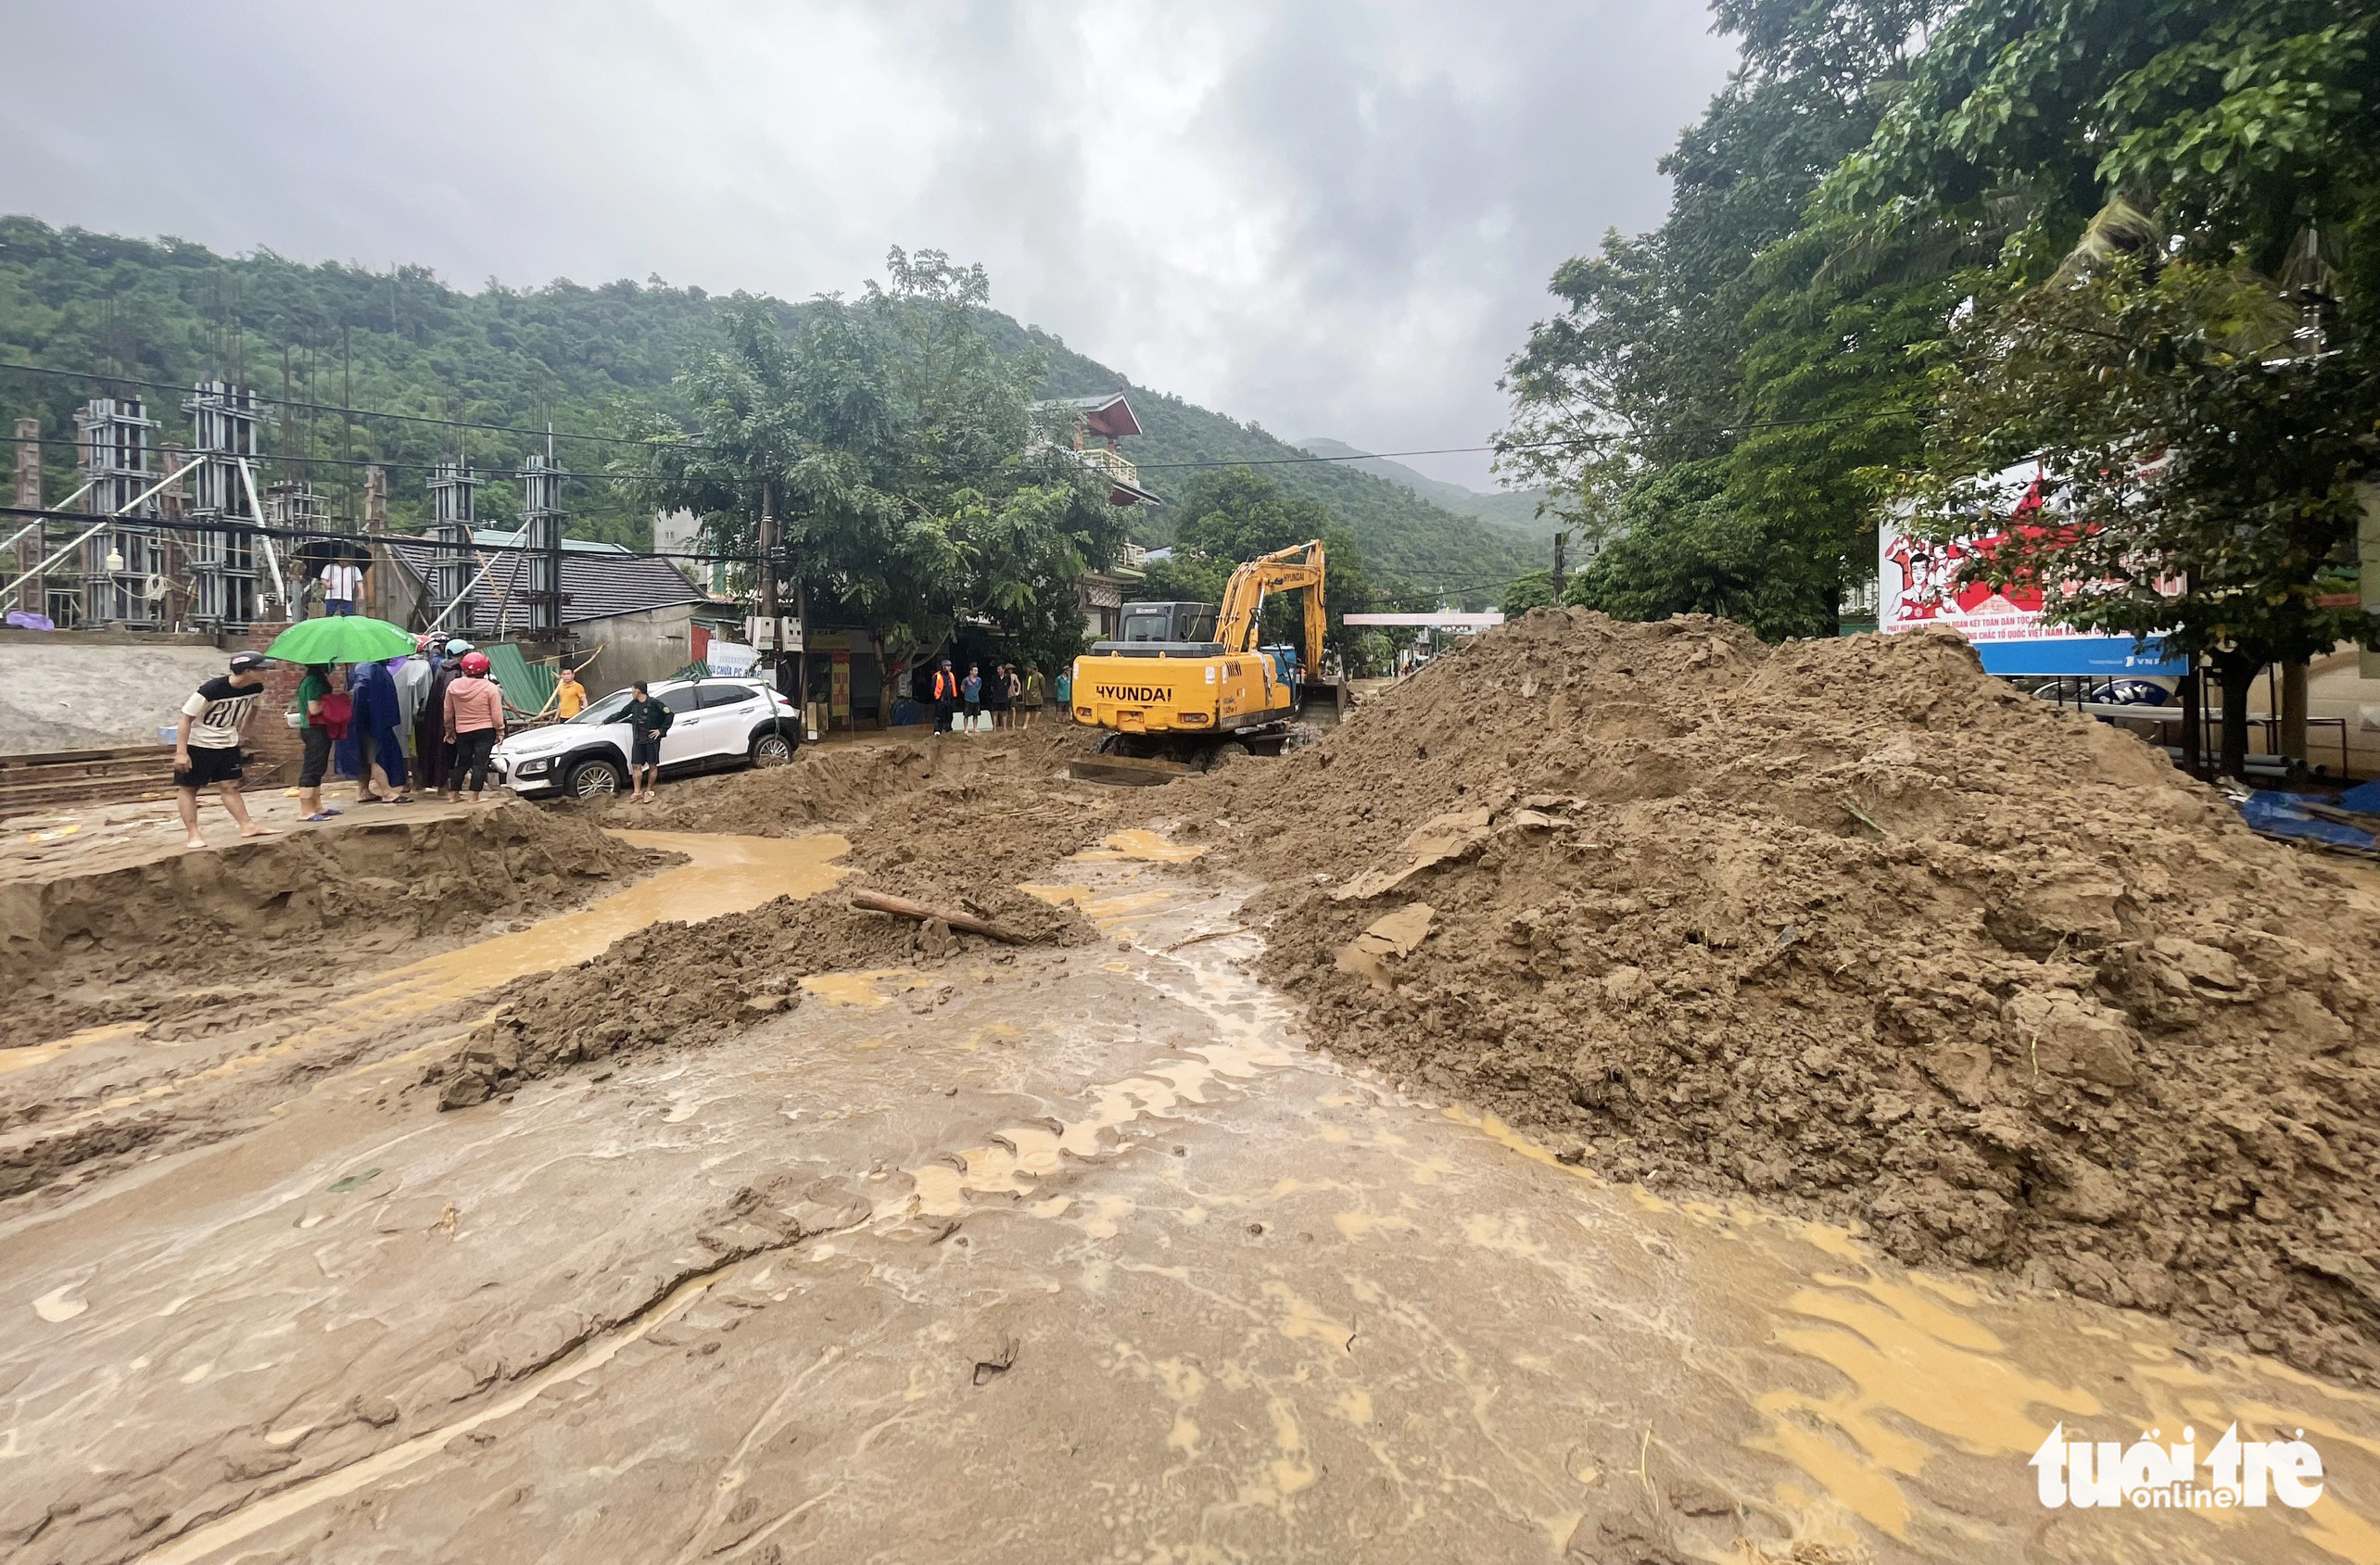 Mud blocks National Highway 7 in Muong Xen Town following a flash flood in Ky Son District, Nghe An Province, Vietnam, October 2, 2022. Photo: N. Thang / Tuoi Tre